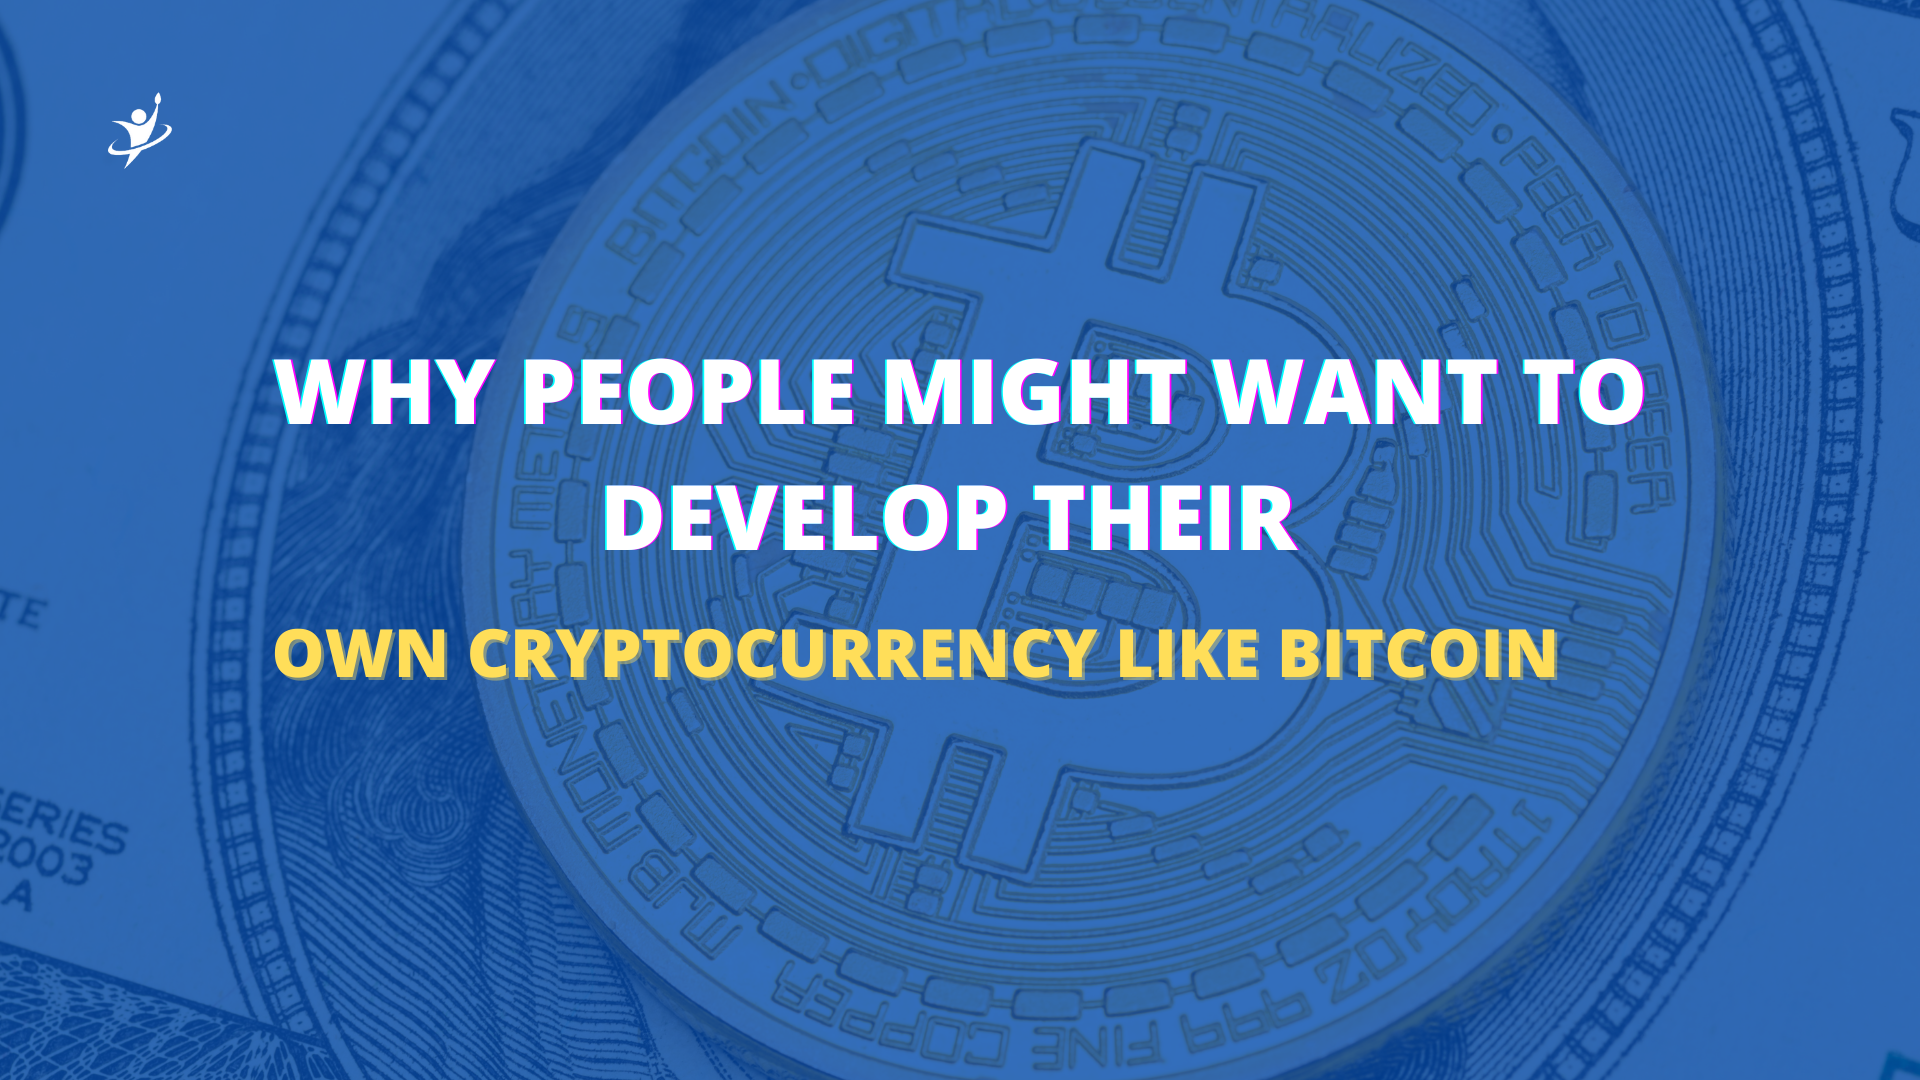 Why people might want to develop their own cryptocurrency like Bitcoin